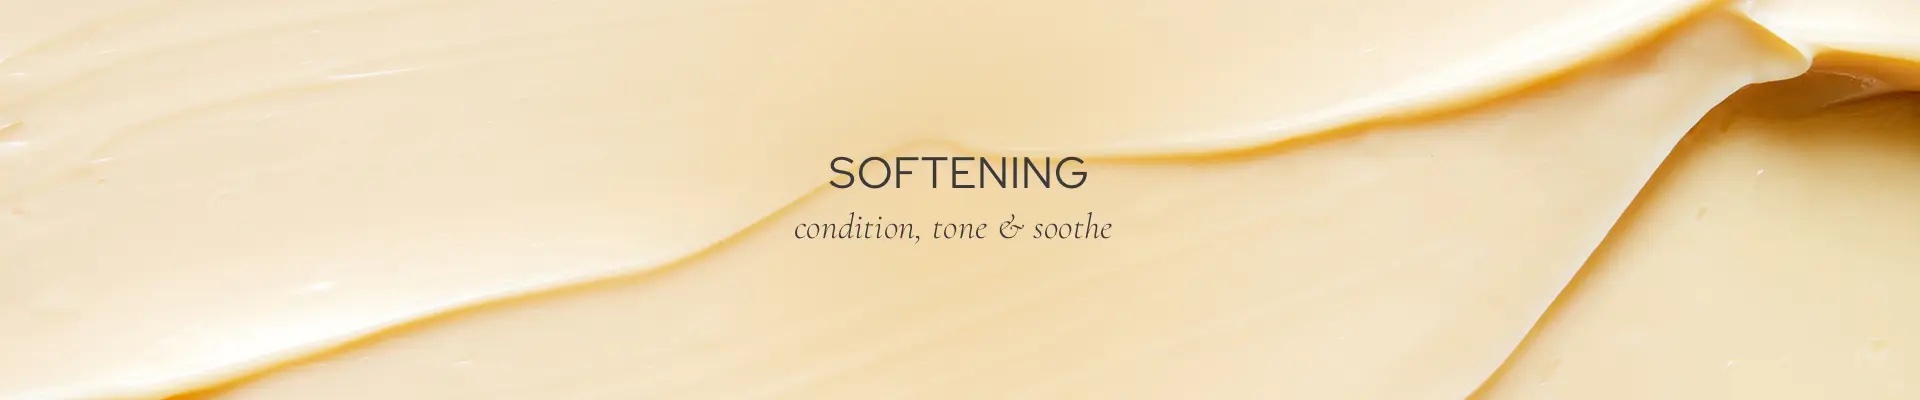 Softening - condition, tone & soothe